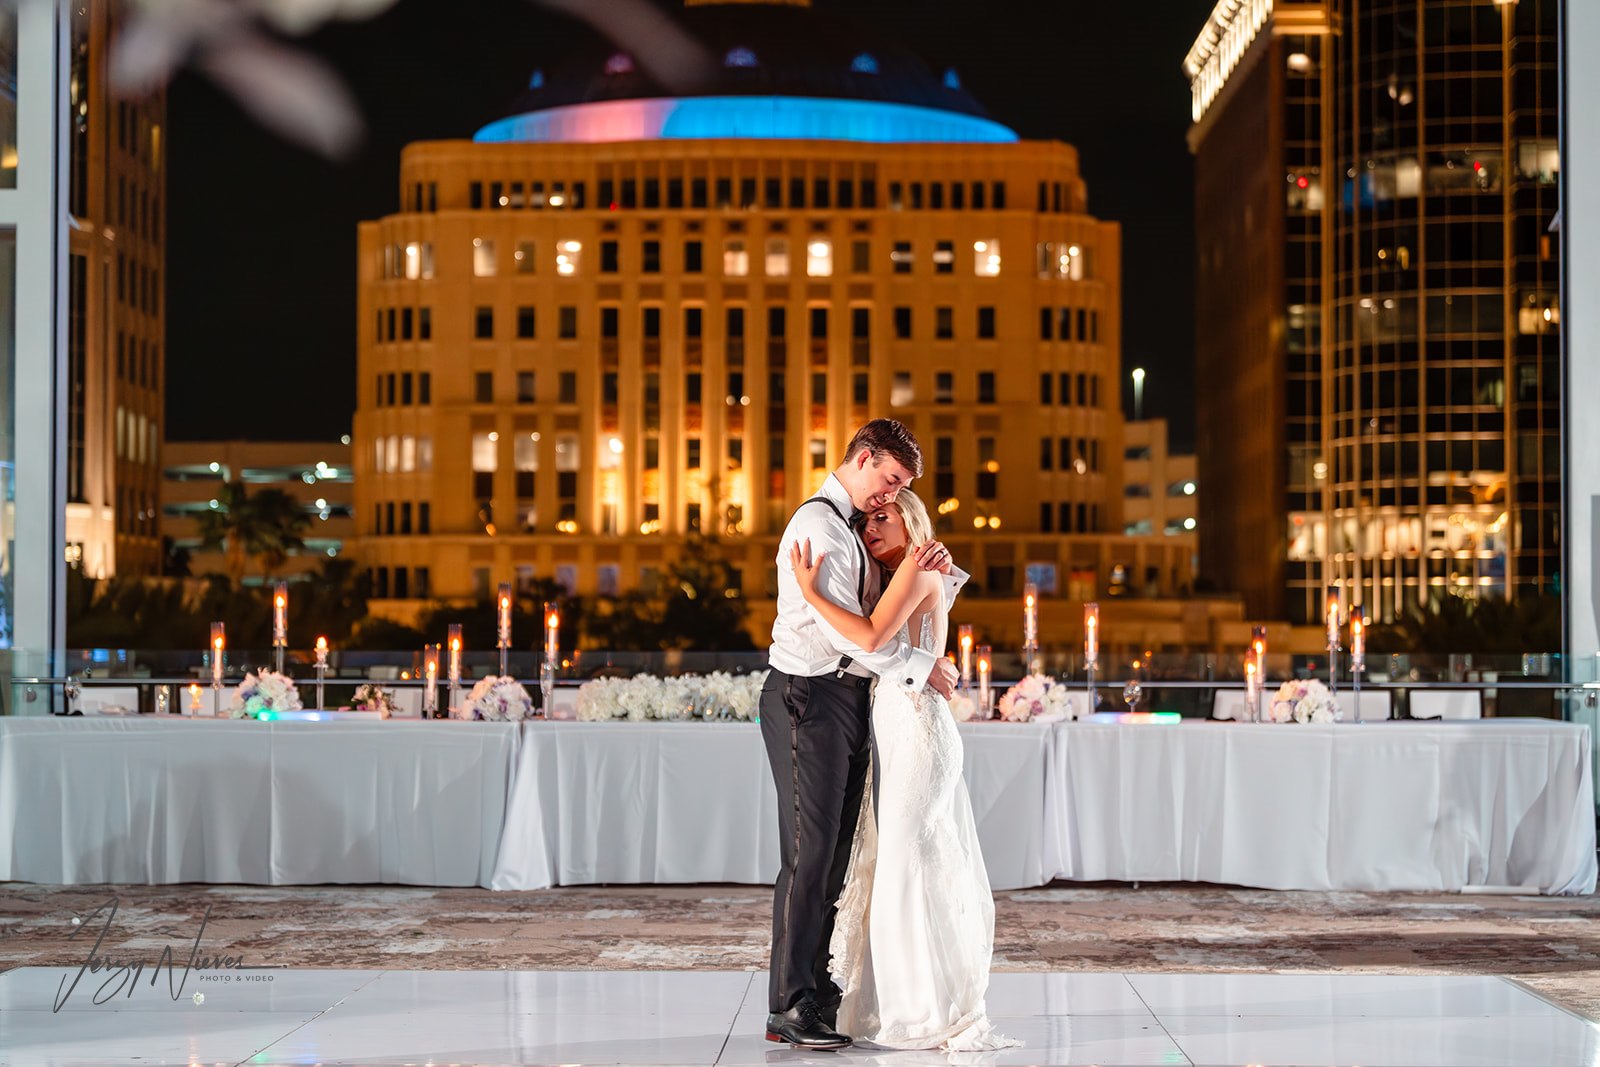 Romantic image of the bride and groom slow dancing on the rooftop of the Dr Phillips Performing Arts Center, with the night sky and cityscape in the background.